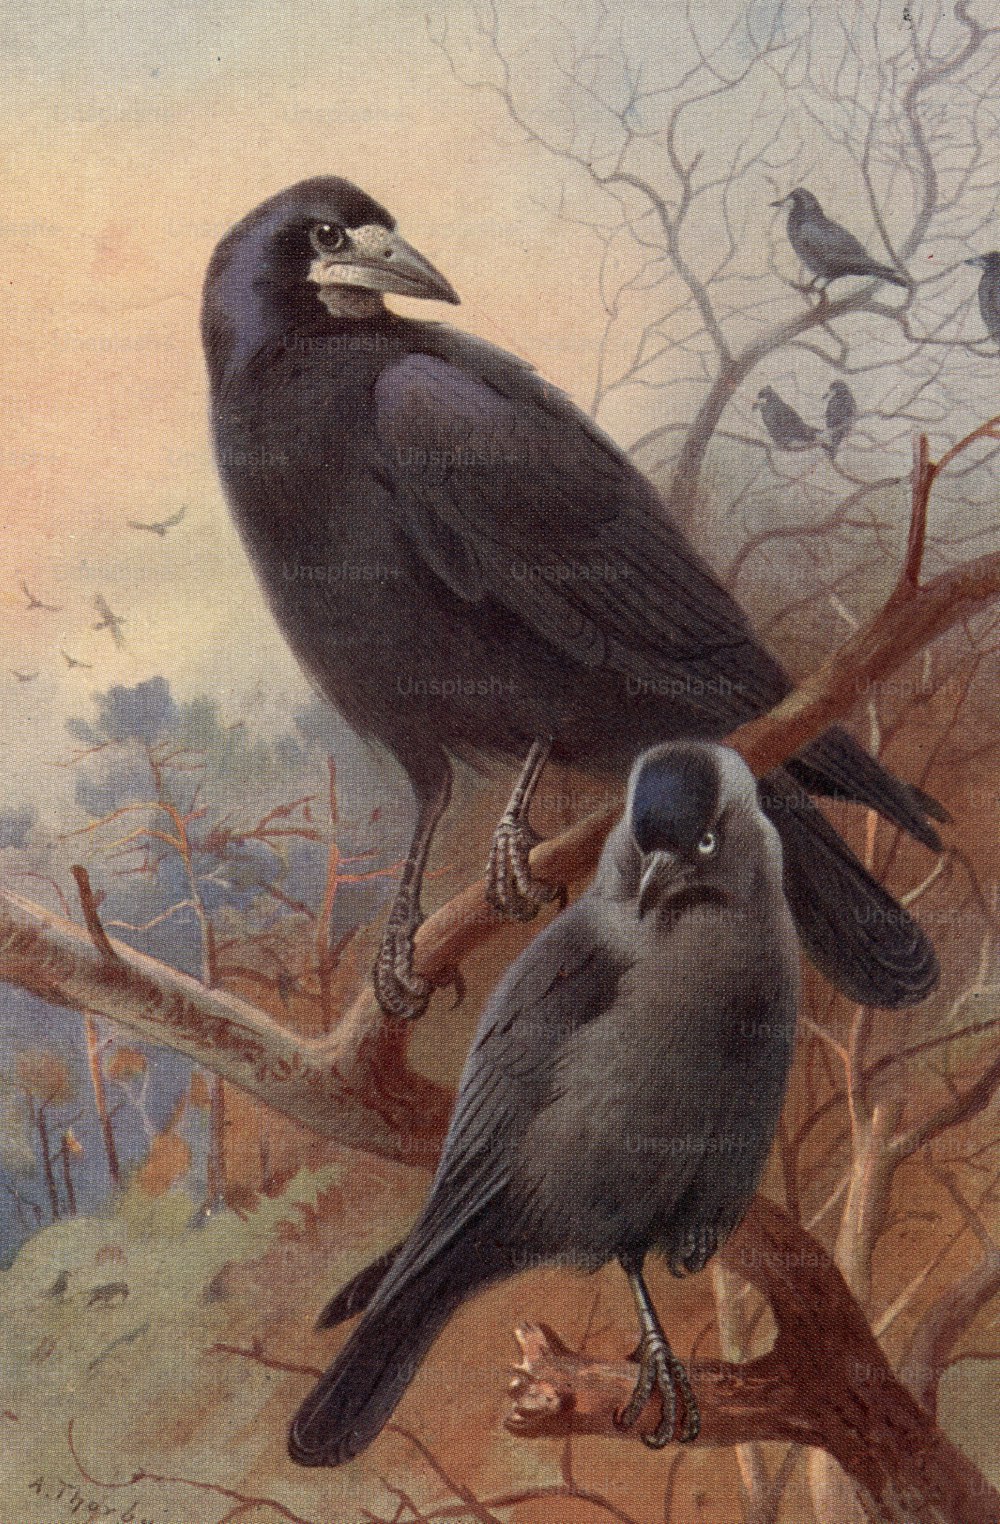 circa 1800:  A rook (top) and jackdaw (bottom), two birds of the crow family.  (Photo by Hulton Archive/Getty Images)